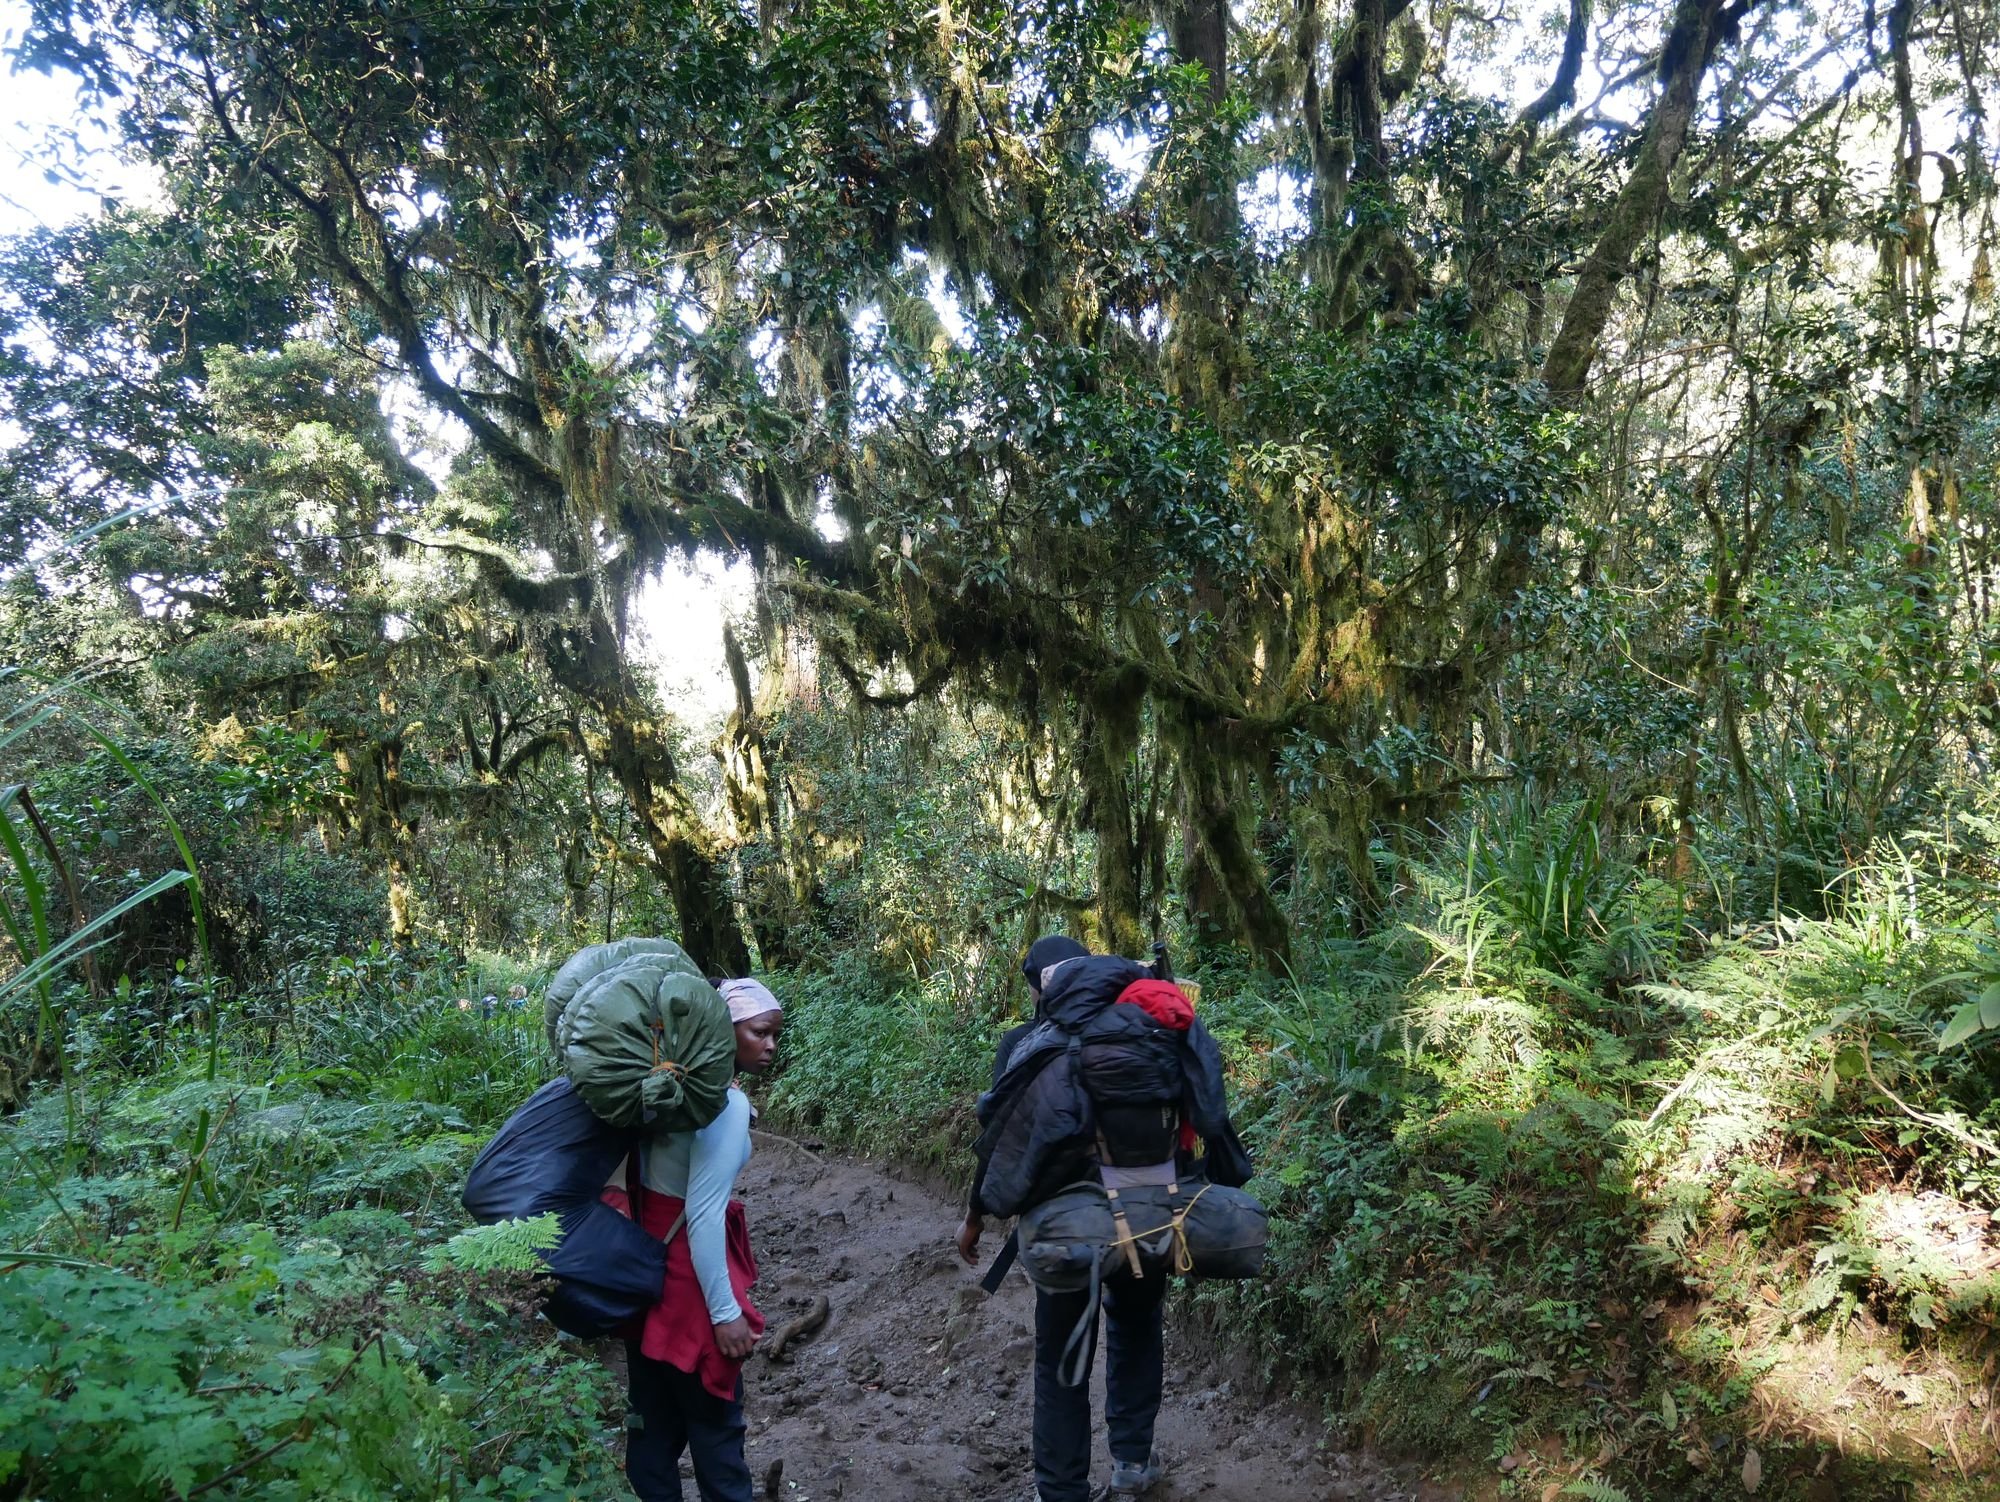 Two porters on a muddy trail surrounded by forest on the Machame Route, Kilimanjaro.